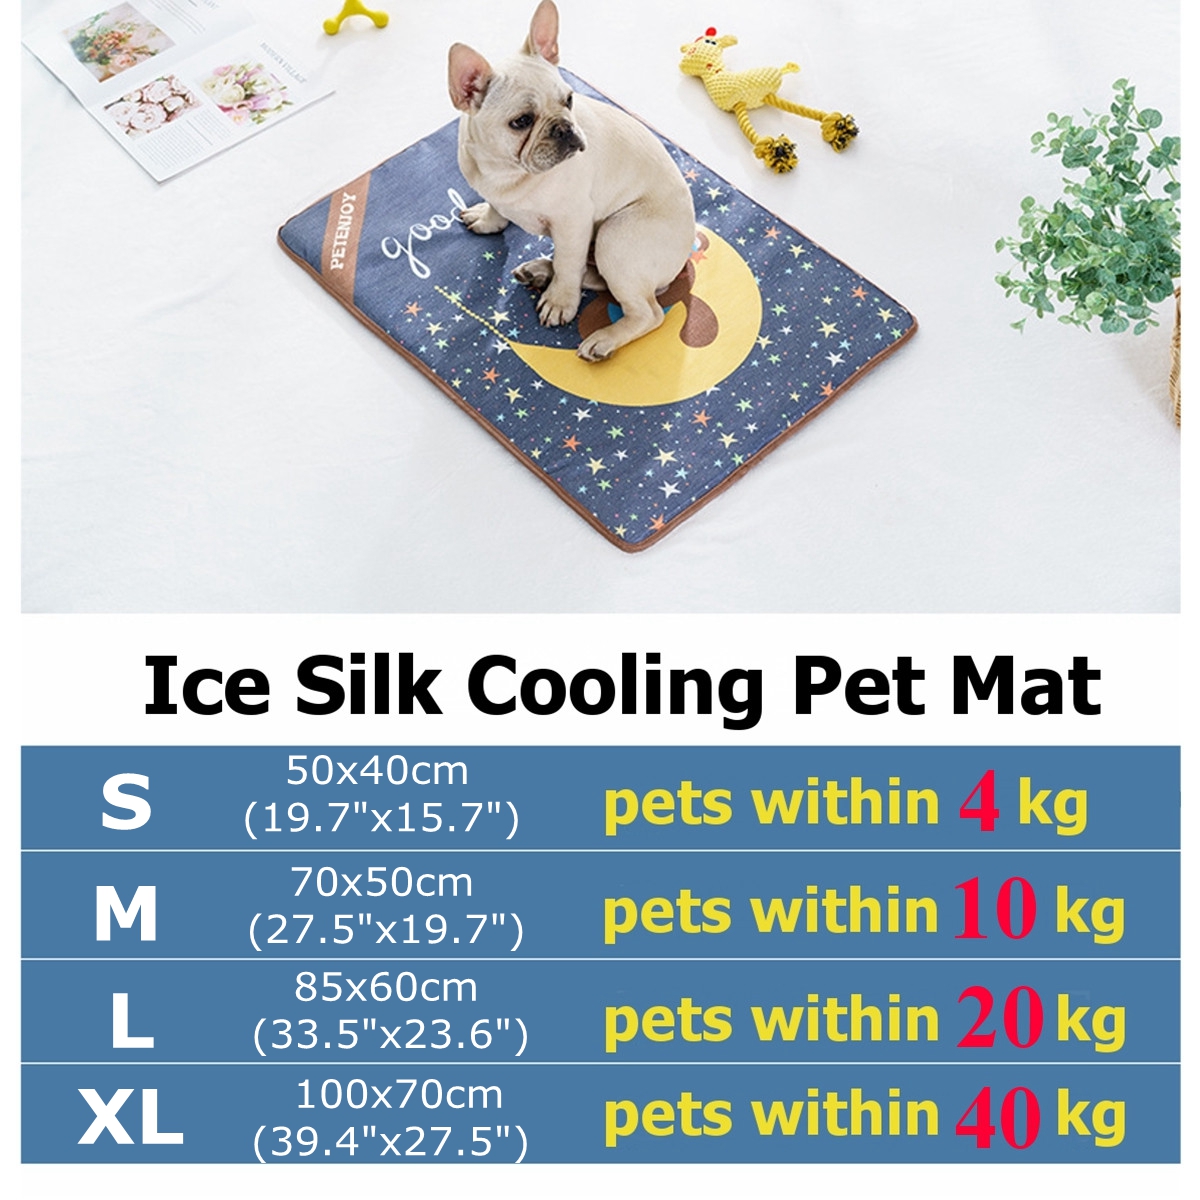 SMLXL-Ice-Silk-Summer-Cooling-Pet-Dog-Cat-Puppy-Cushion-Mat-Pad-Home-1550150-8